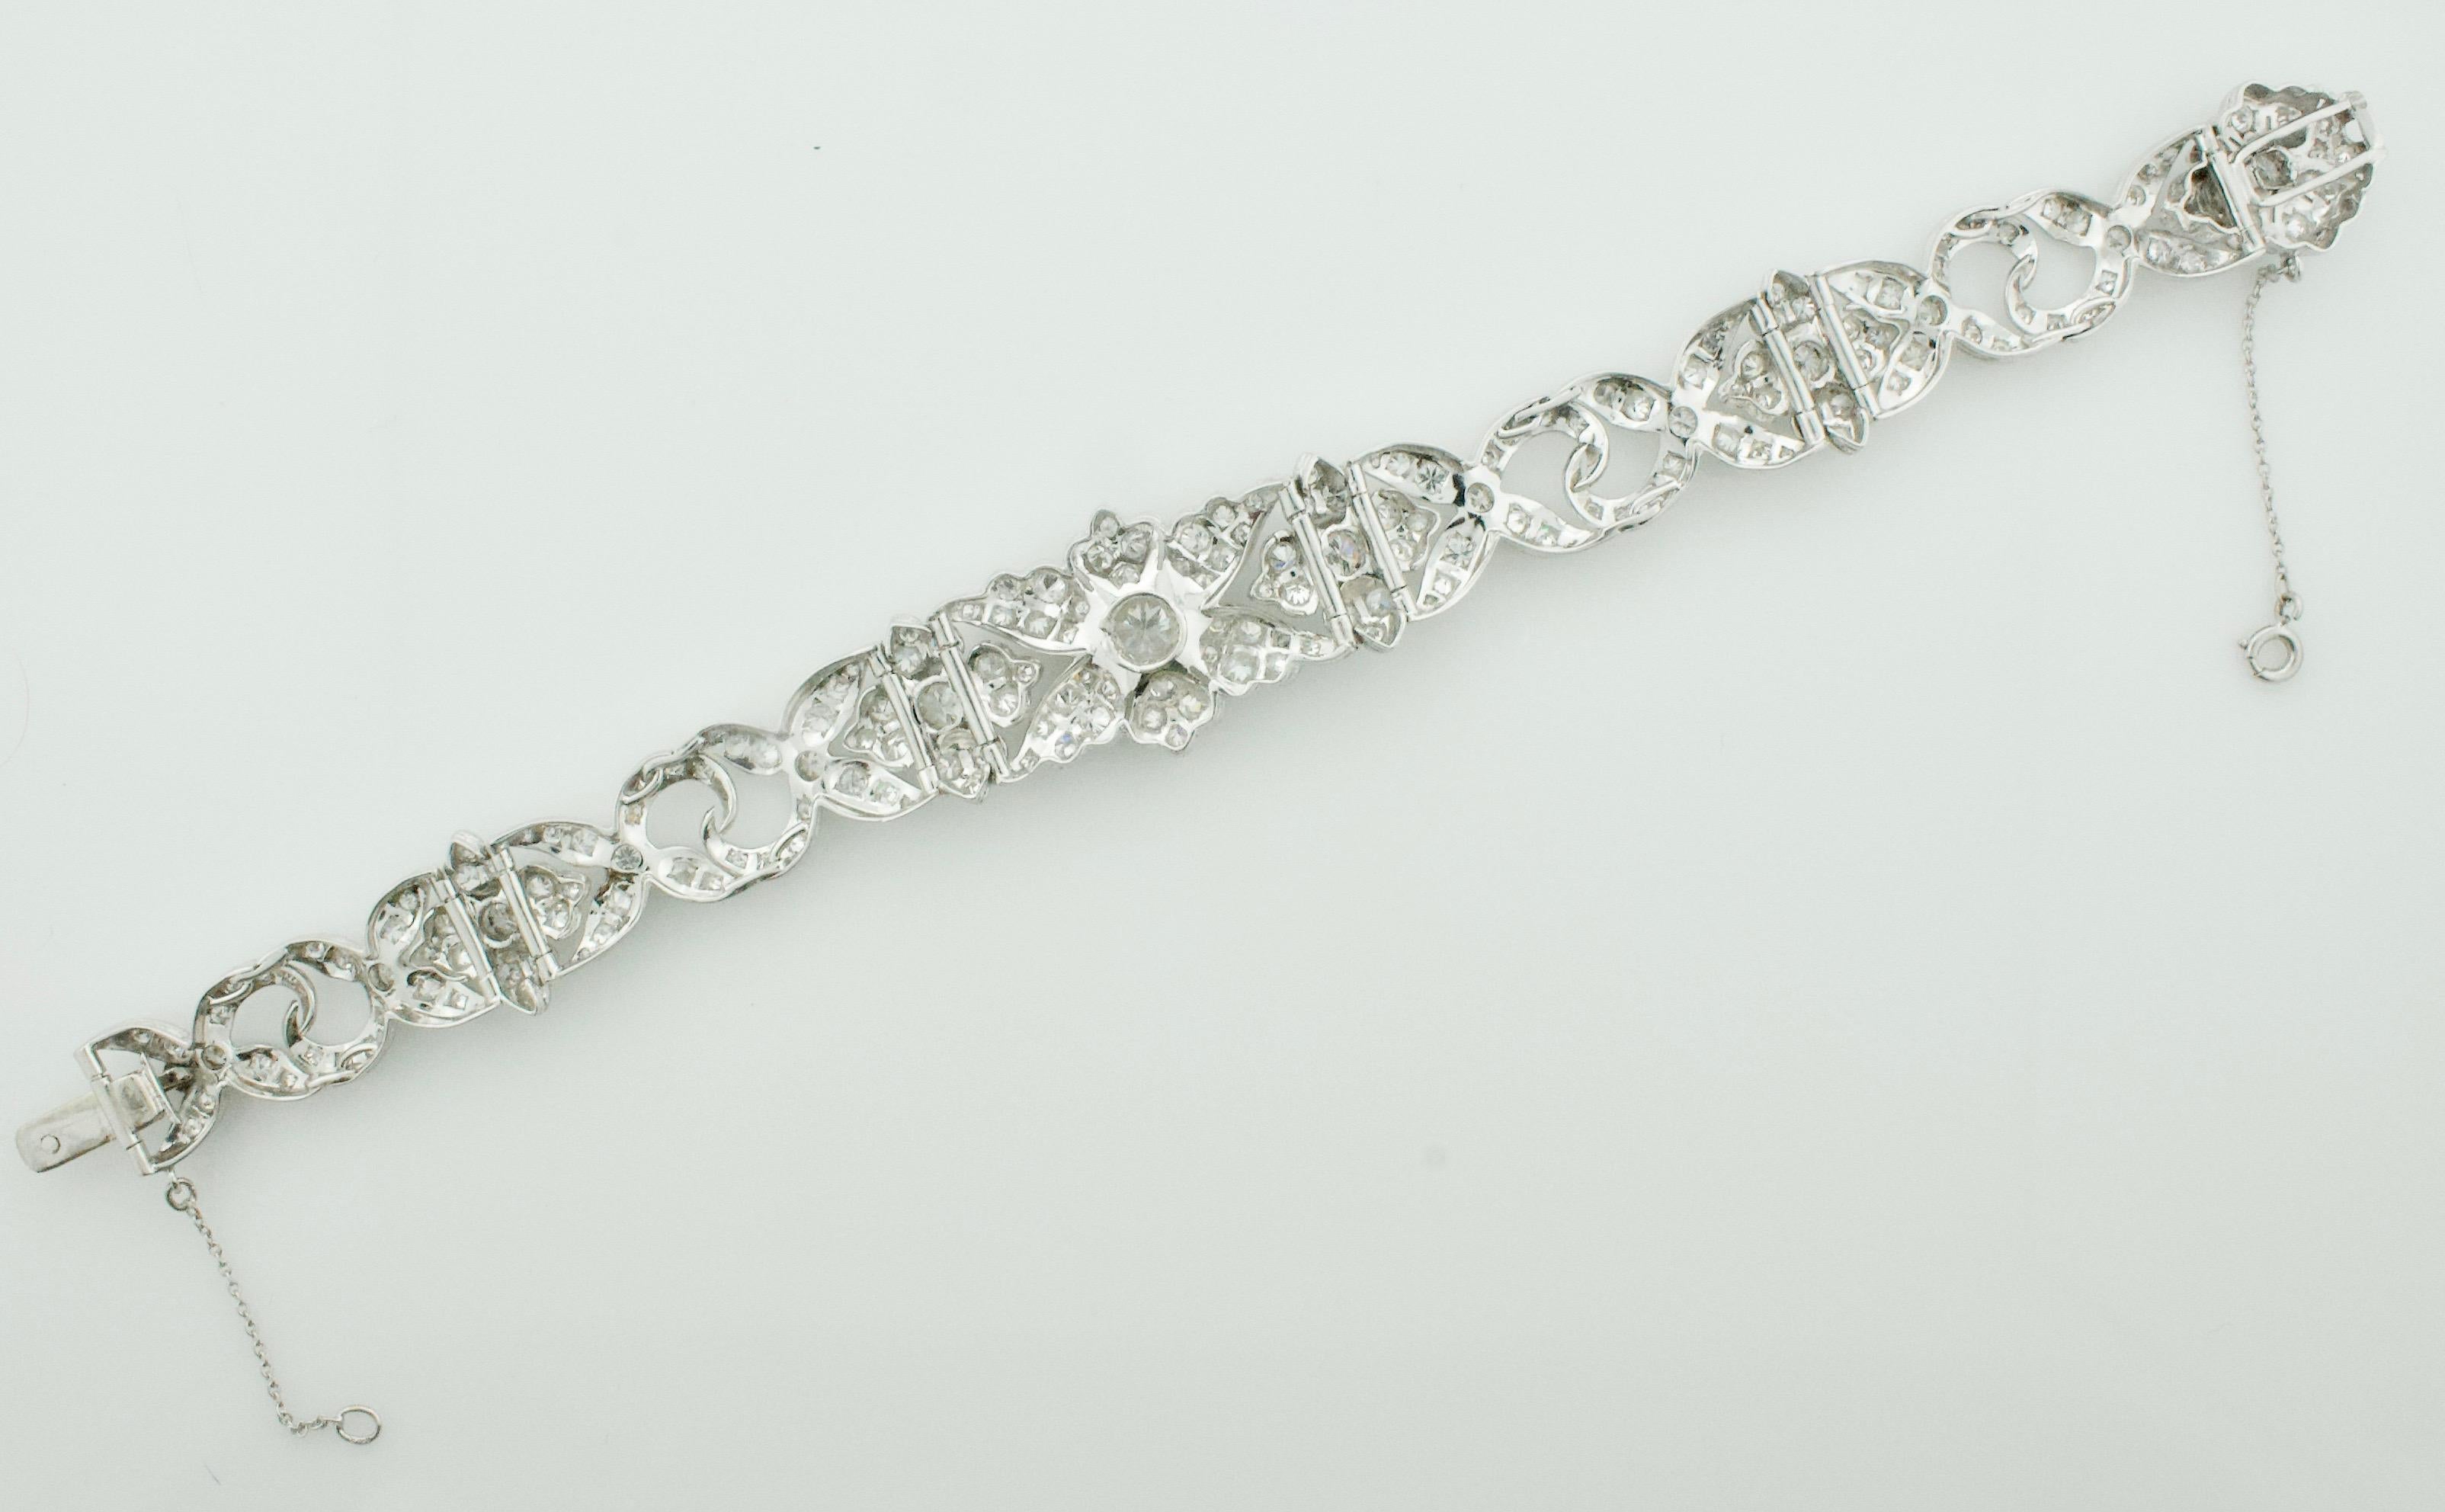 Platinum Diamond Bracelet Circa 1940's 4.40 carats
One  Round Brilliant Cut Diamonds weighing .45 carats approximately [GH SI] [bright with no imperfections visible to the naked eye]
Five Round Brilliant Cut Diamonds weighing .70 carats